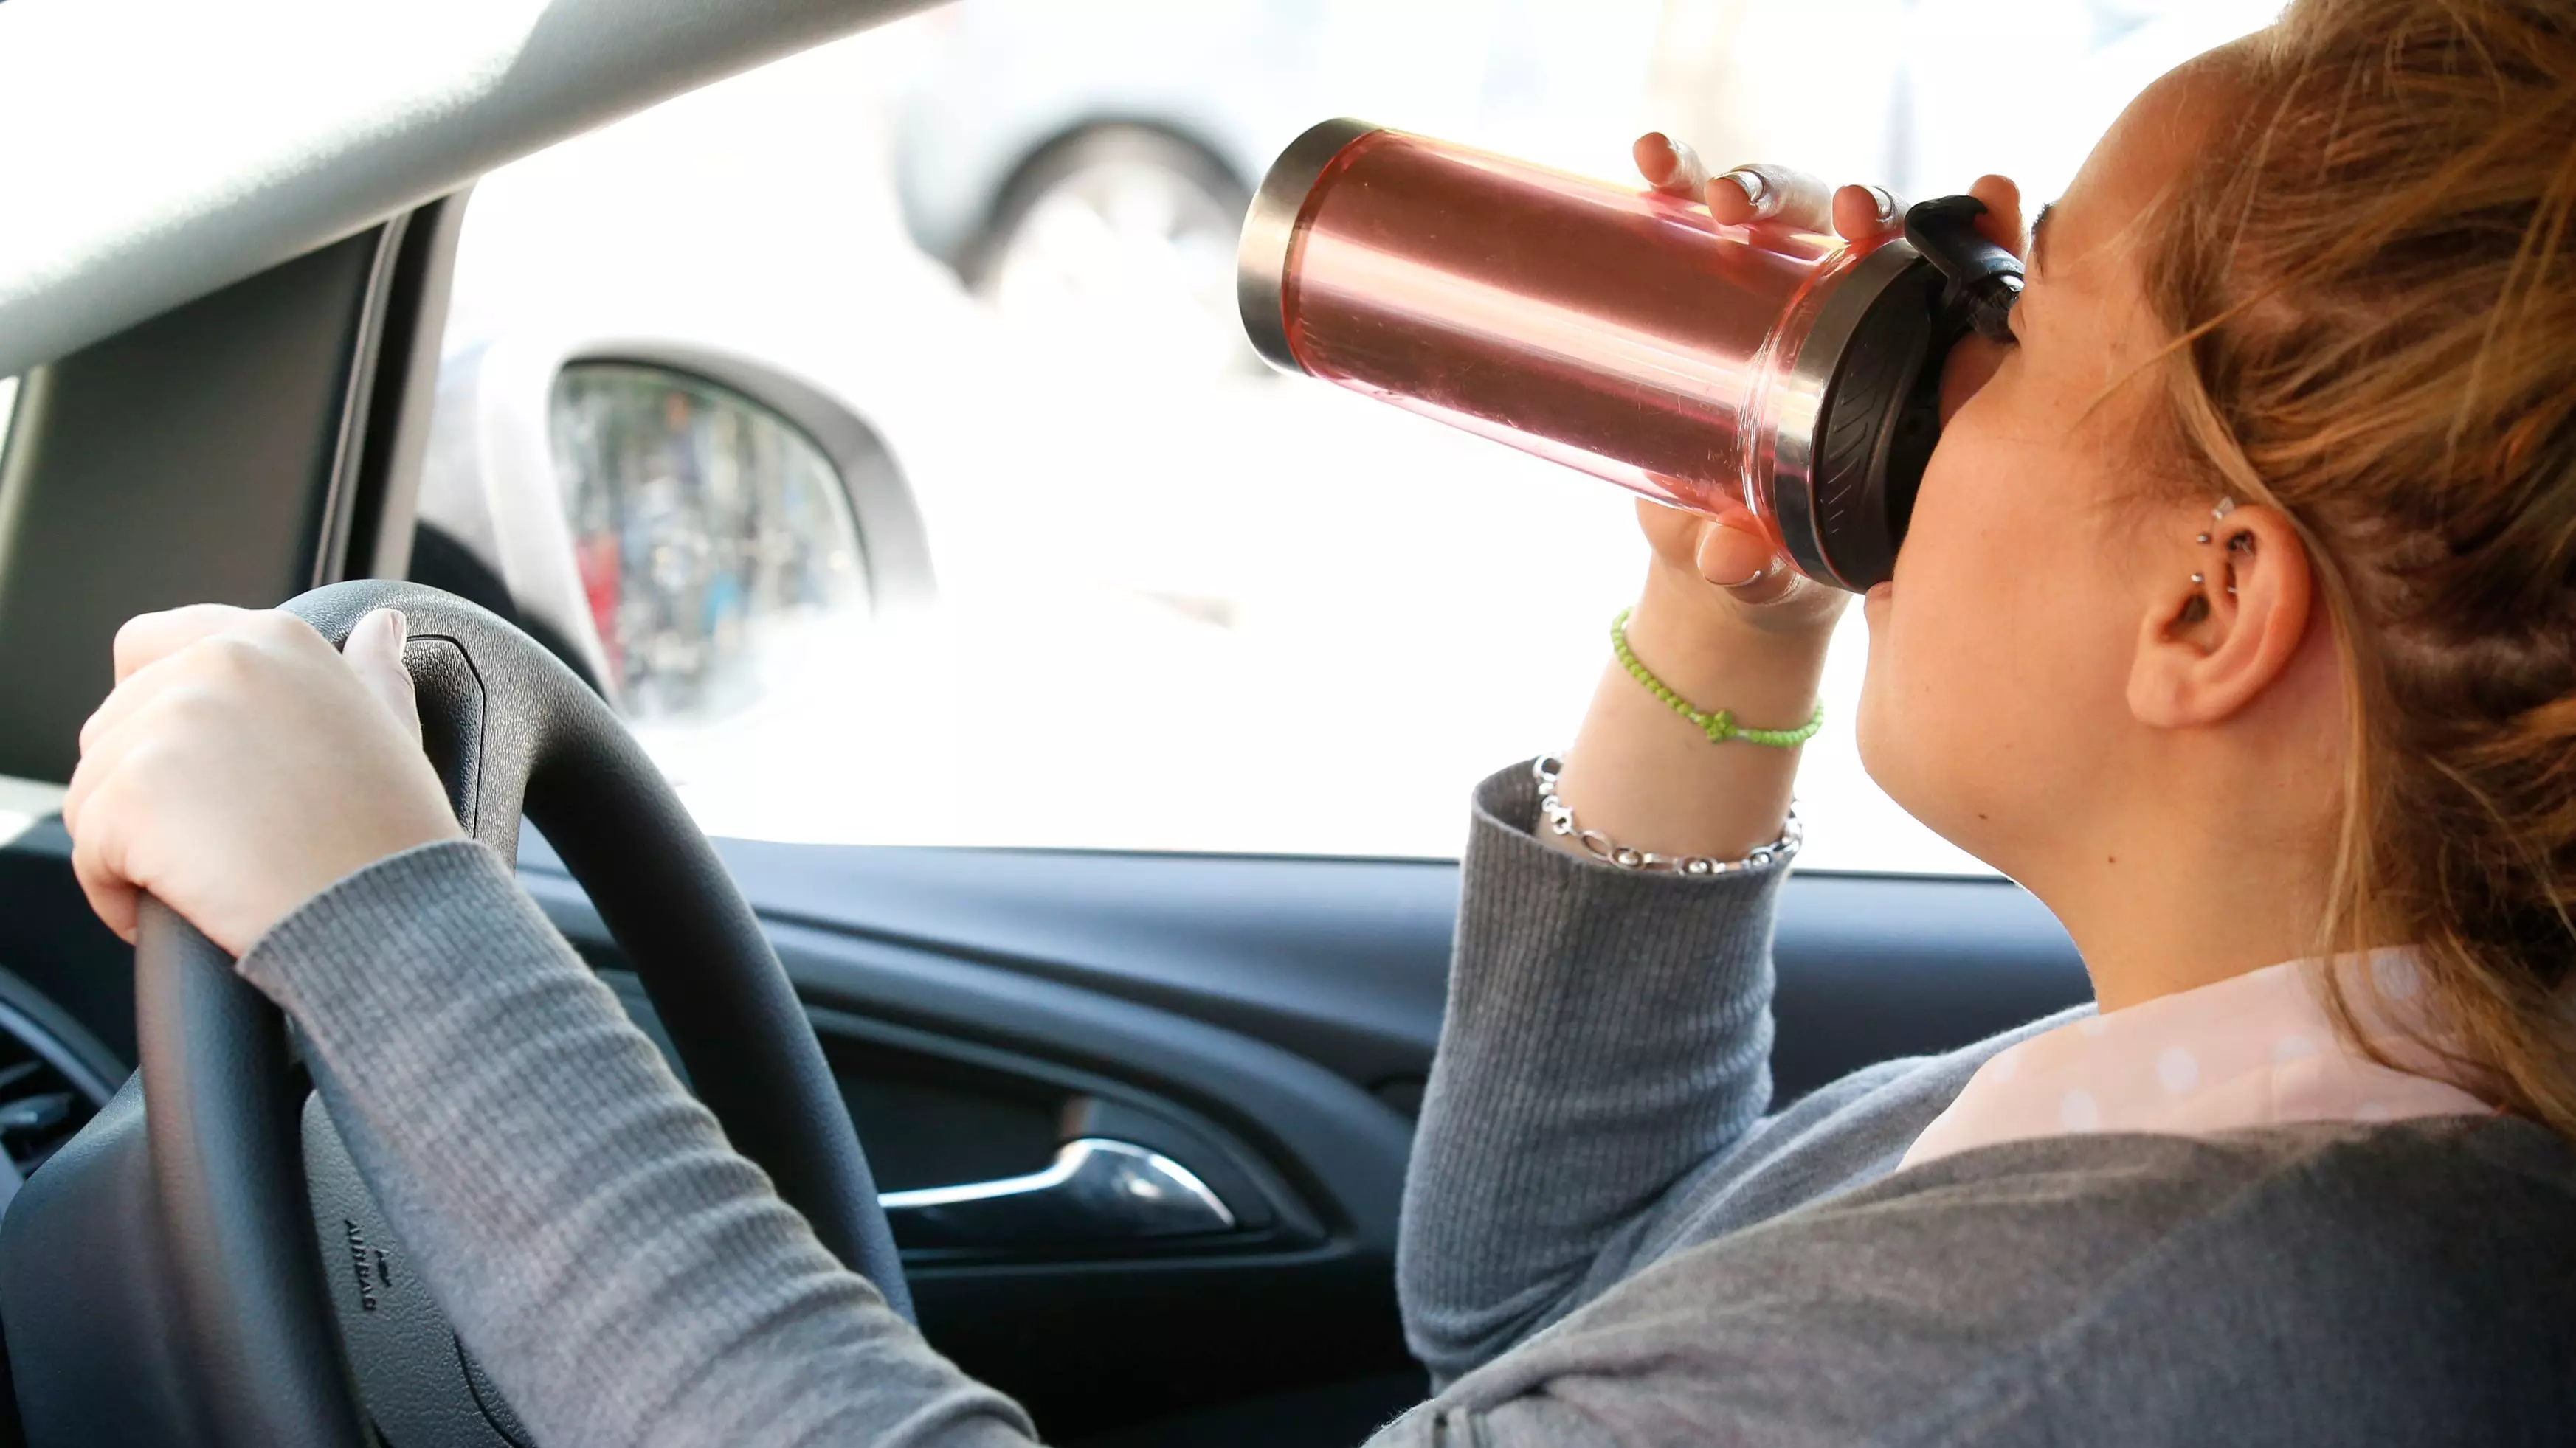 Aussie Woman Threatened With $500 Fine And Three Points For Drinking Coffee While Driving